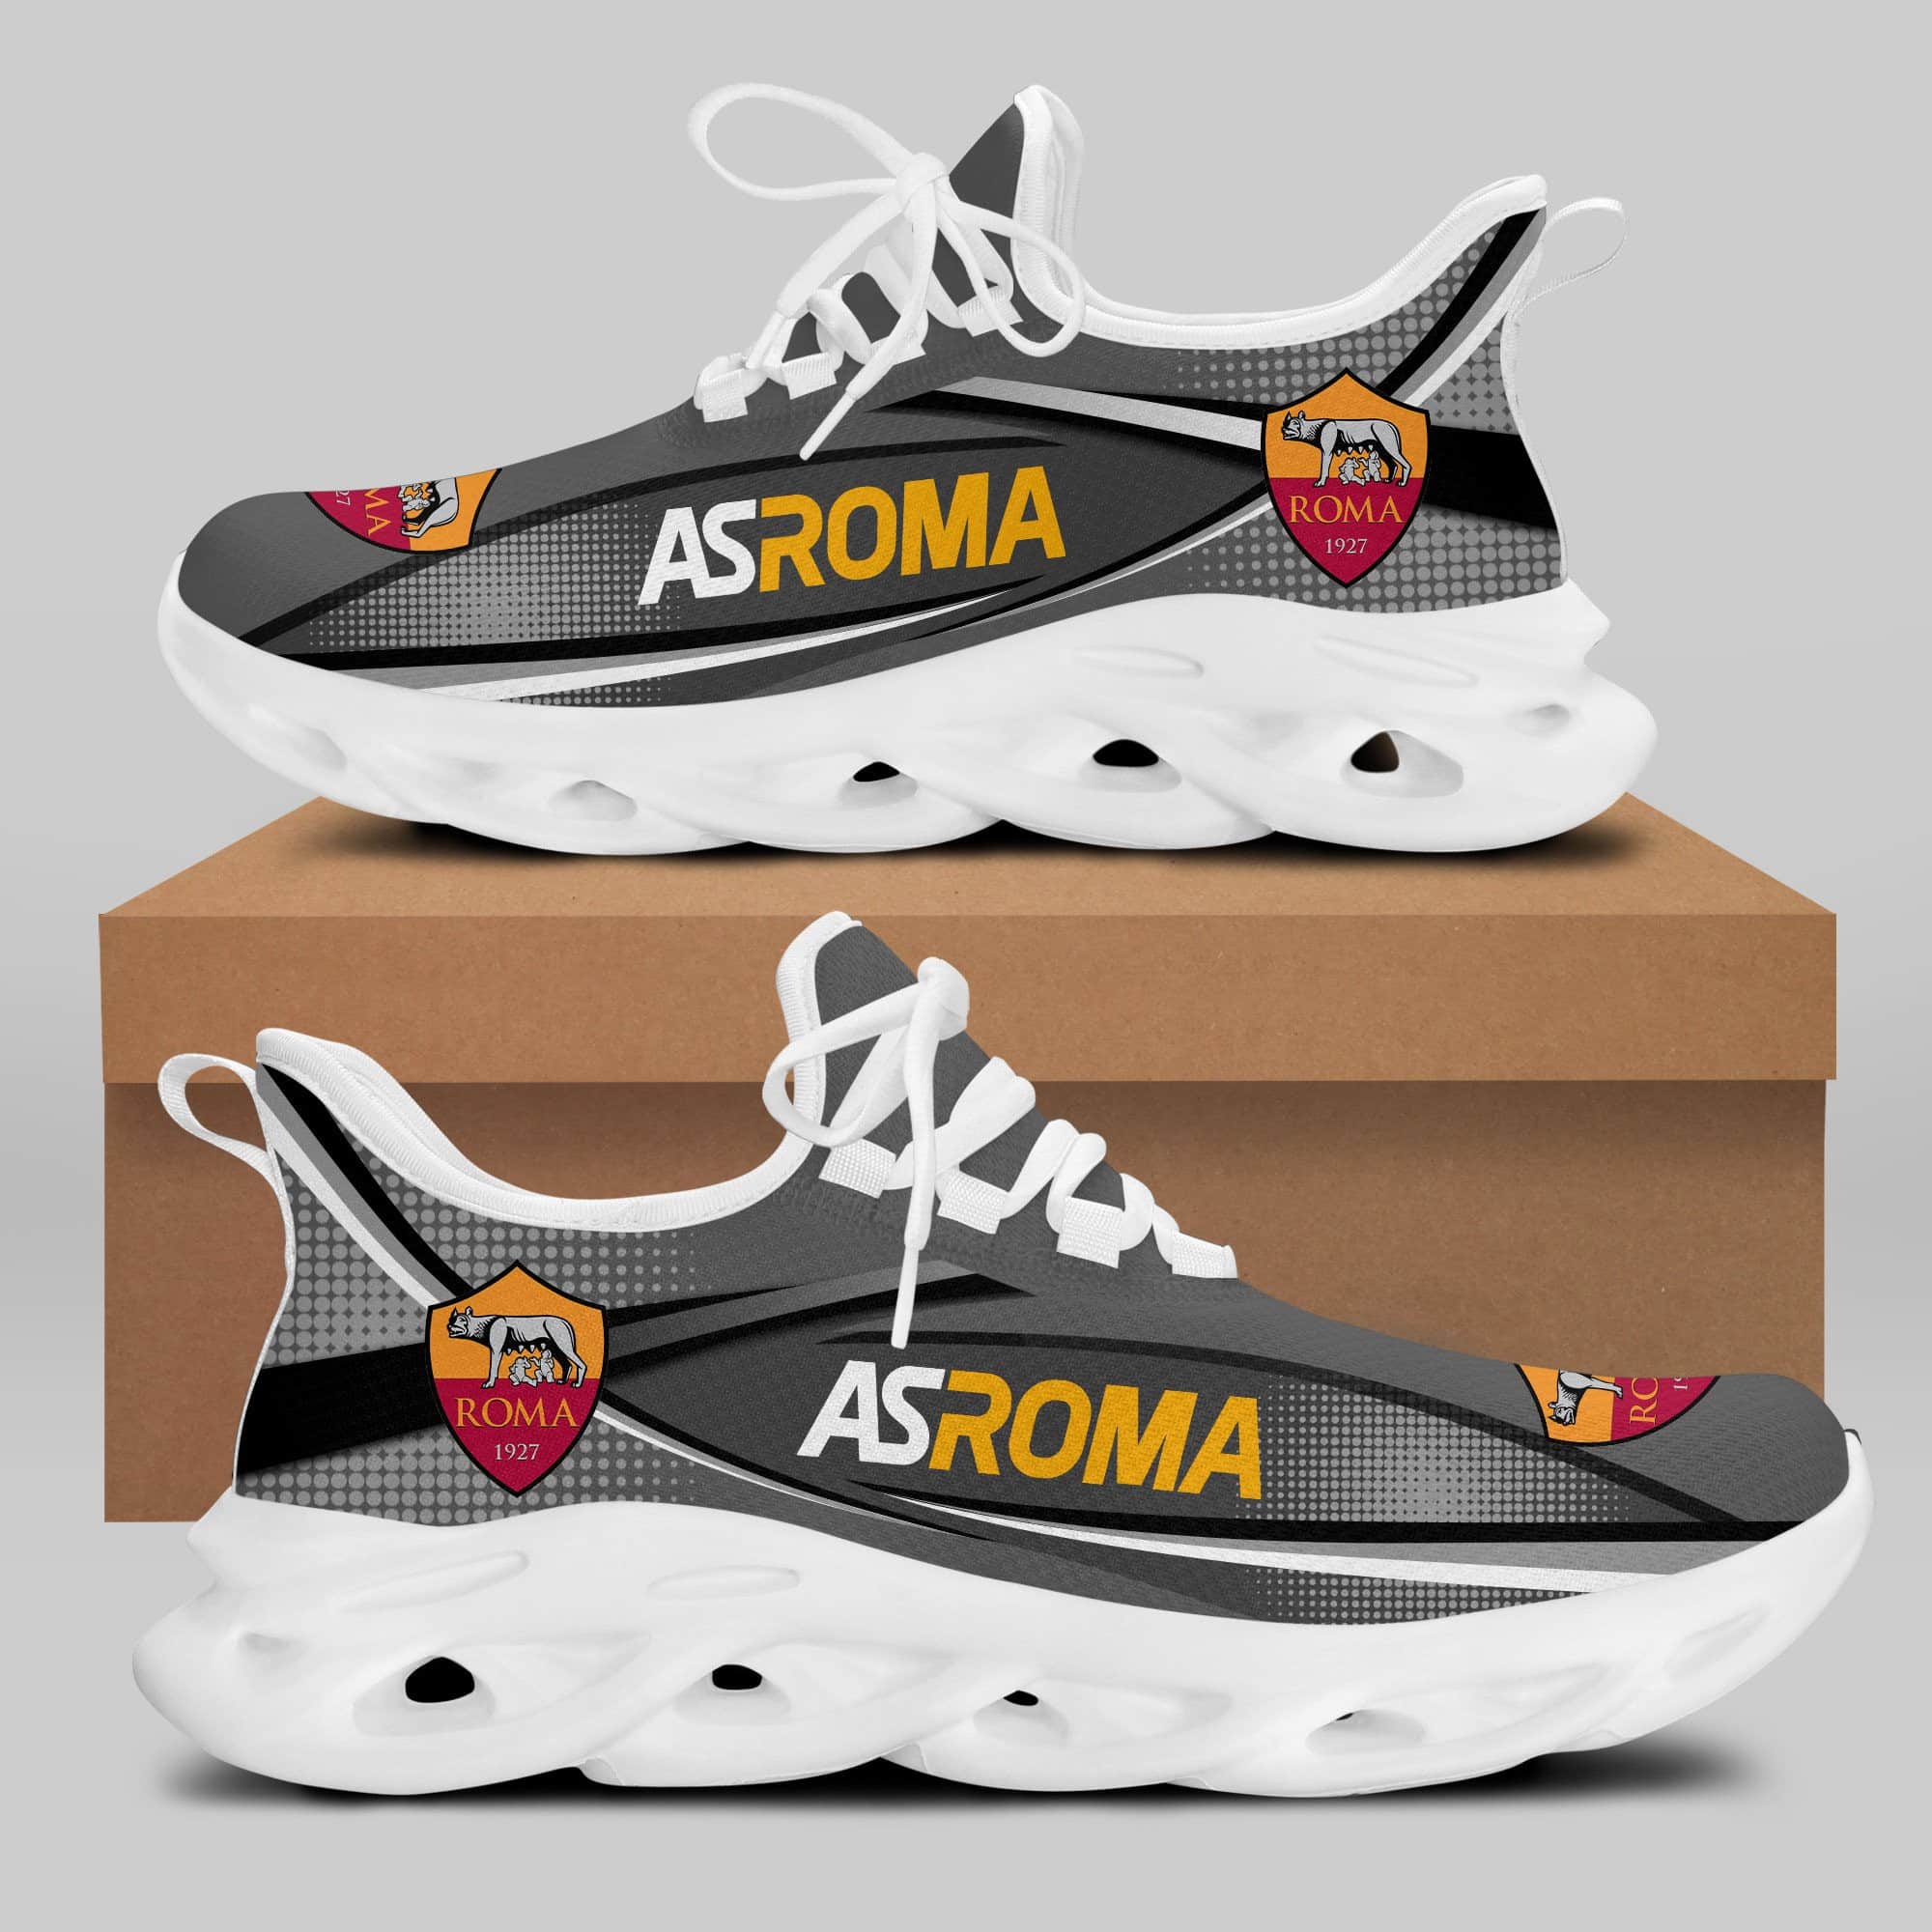 As Roma Running Shoes Max Soul Shoes Sneakers Ver 46 2